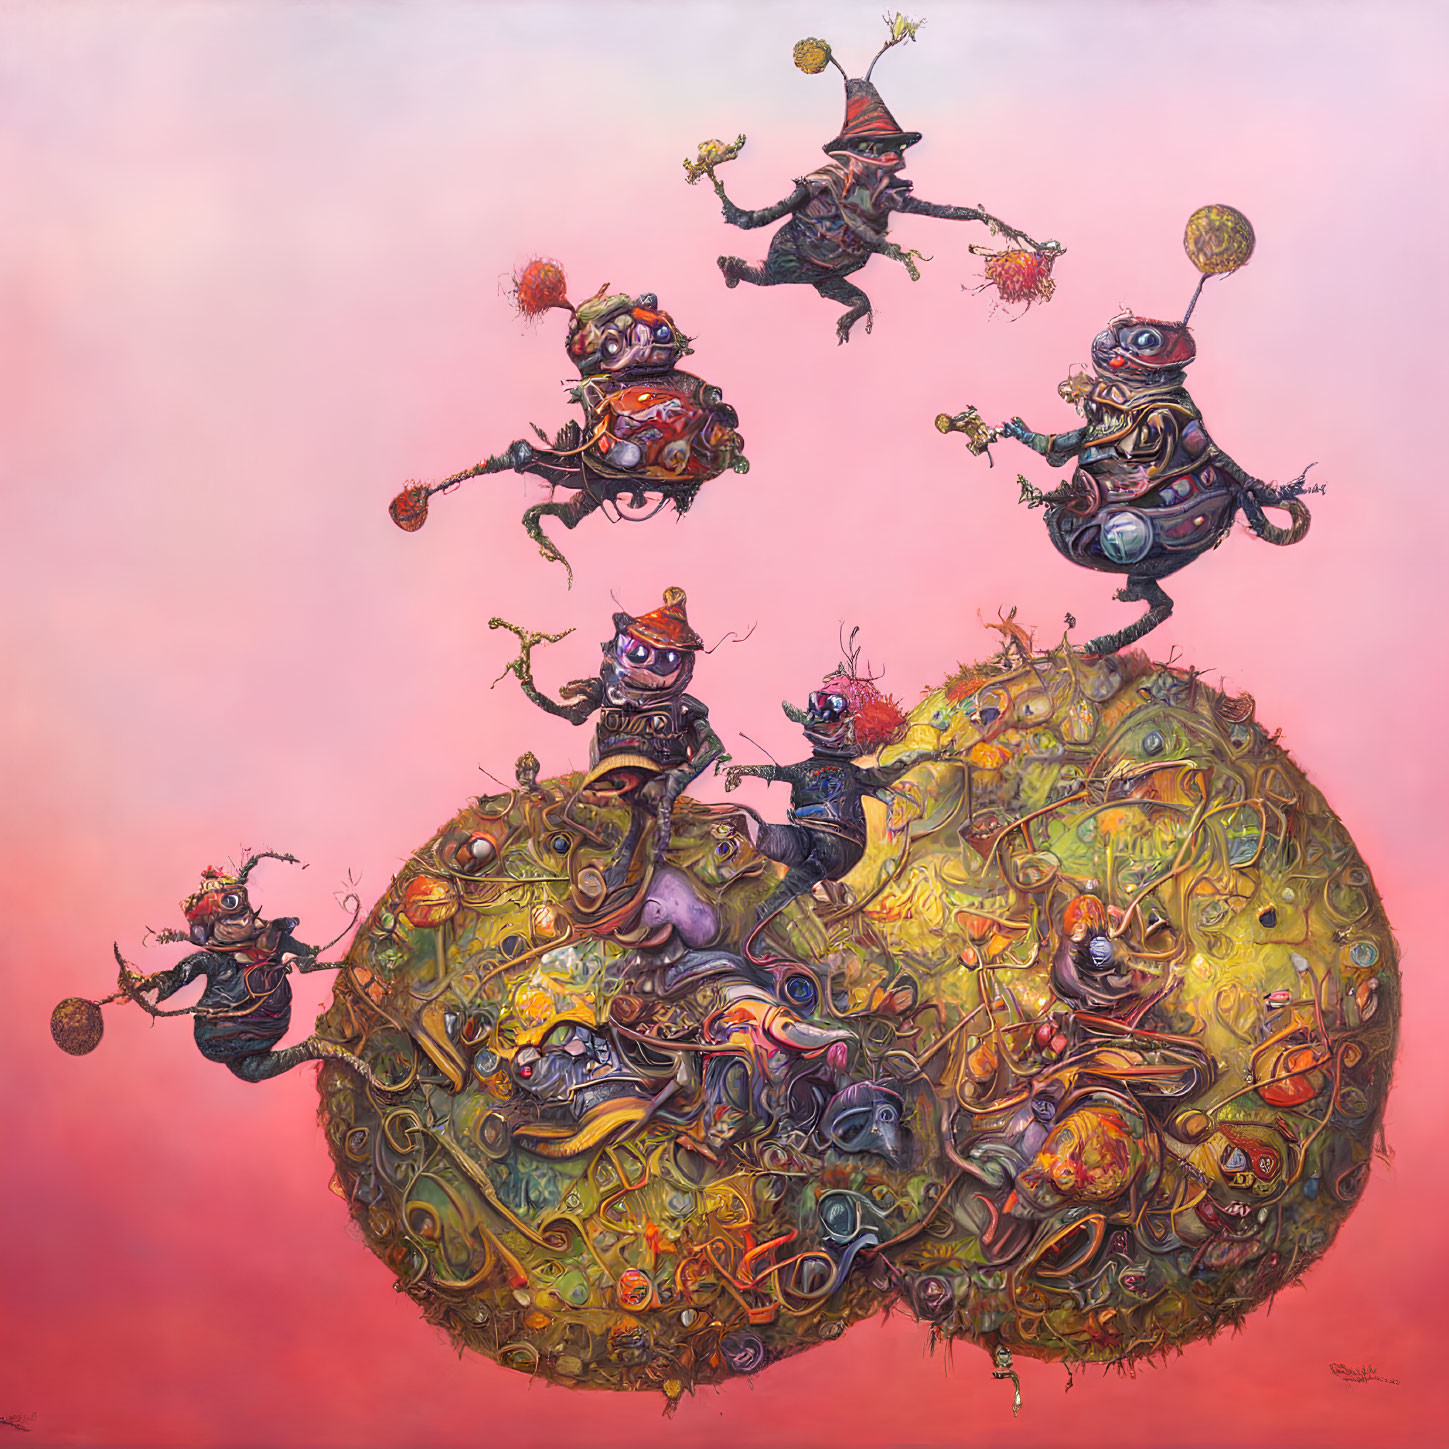 Whimsical surreal artwork: mechanical creatures on floating islands